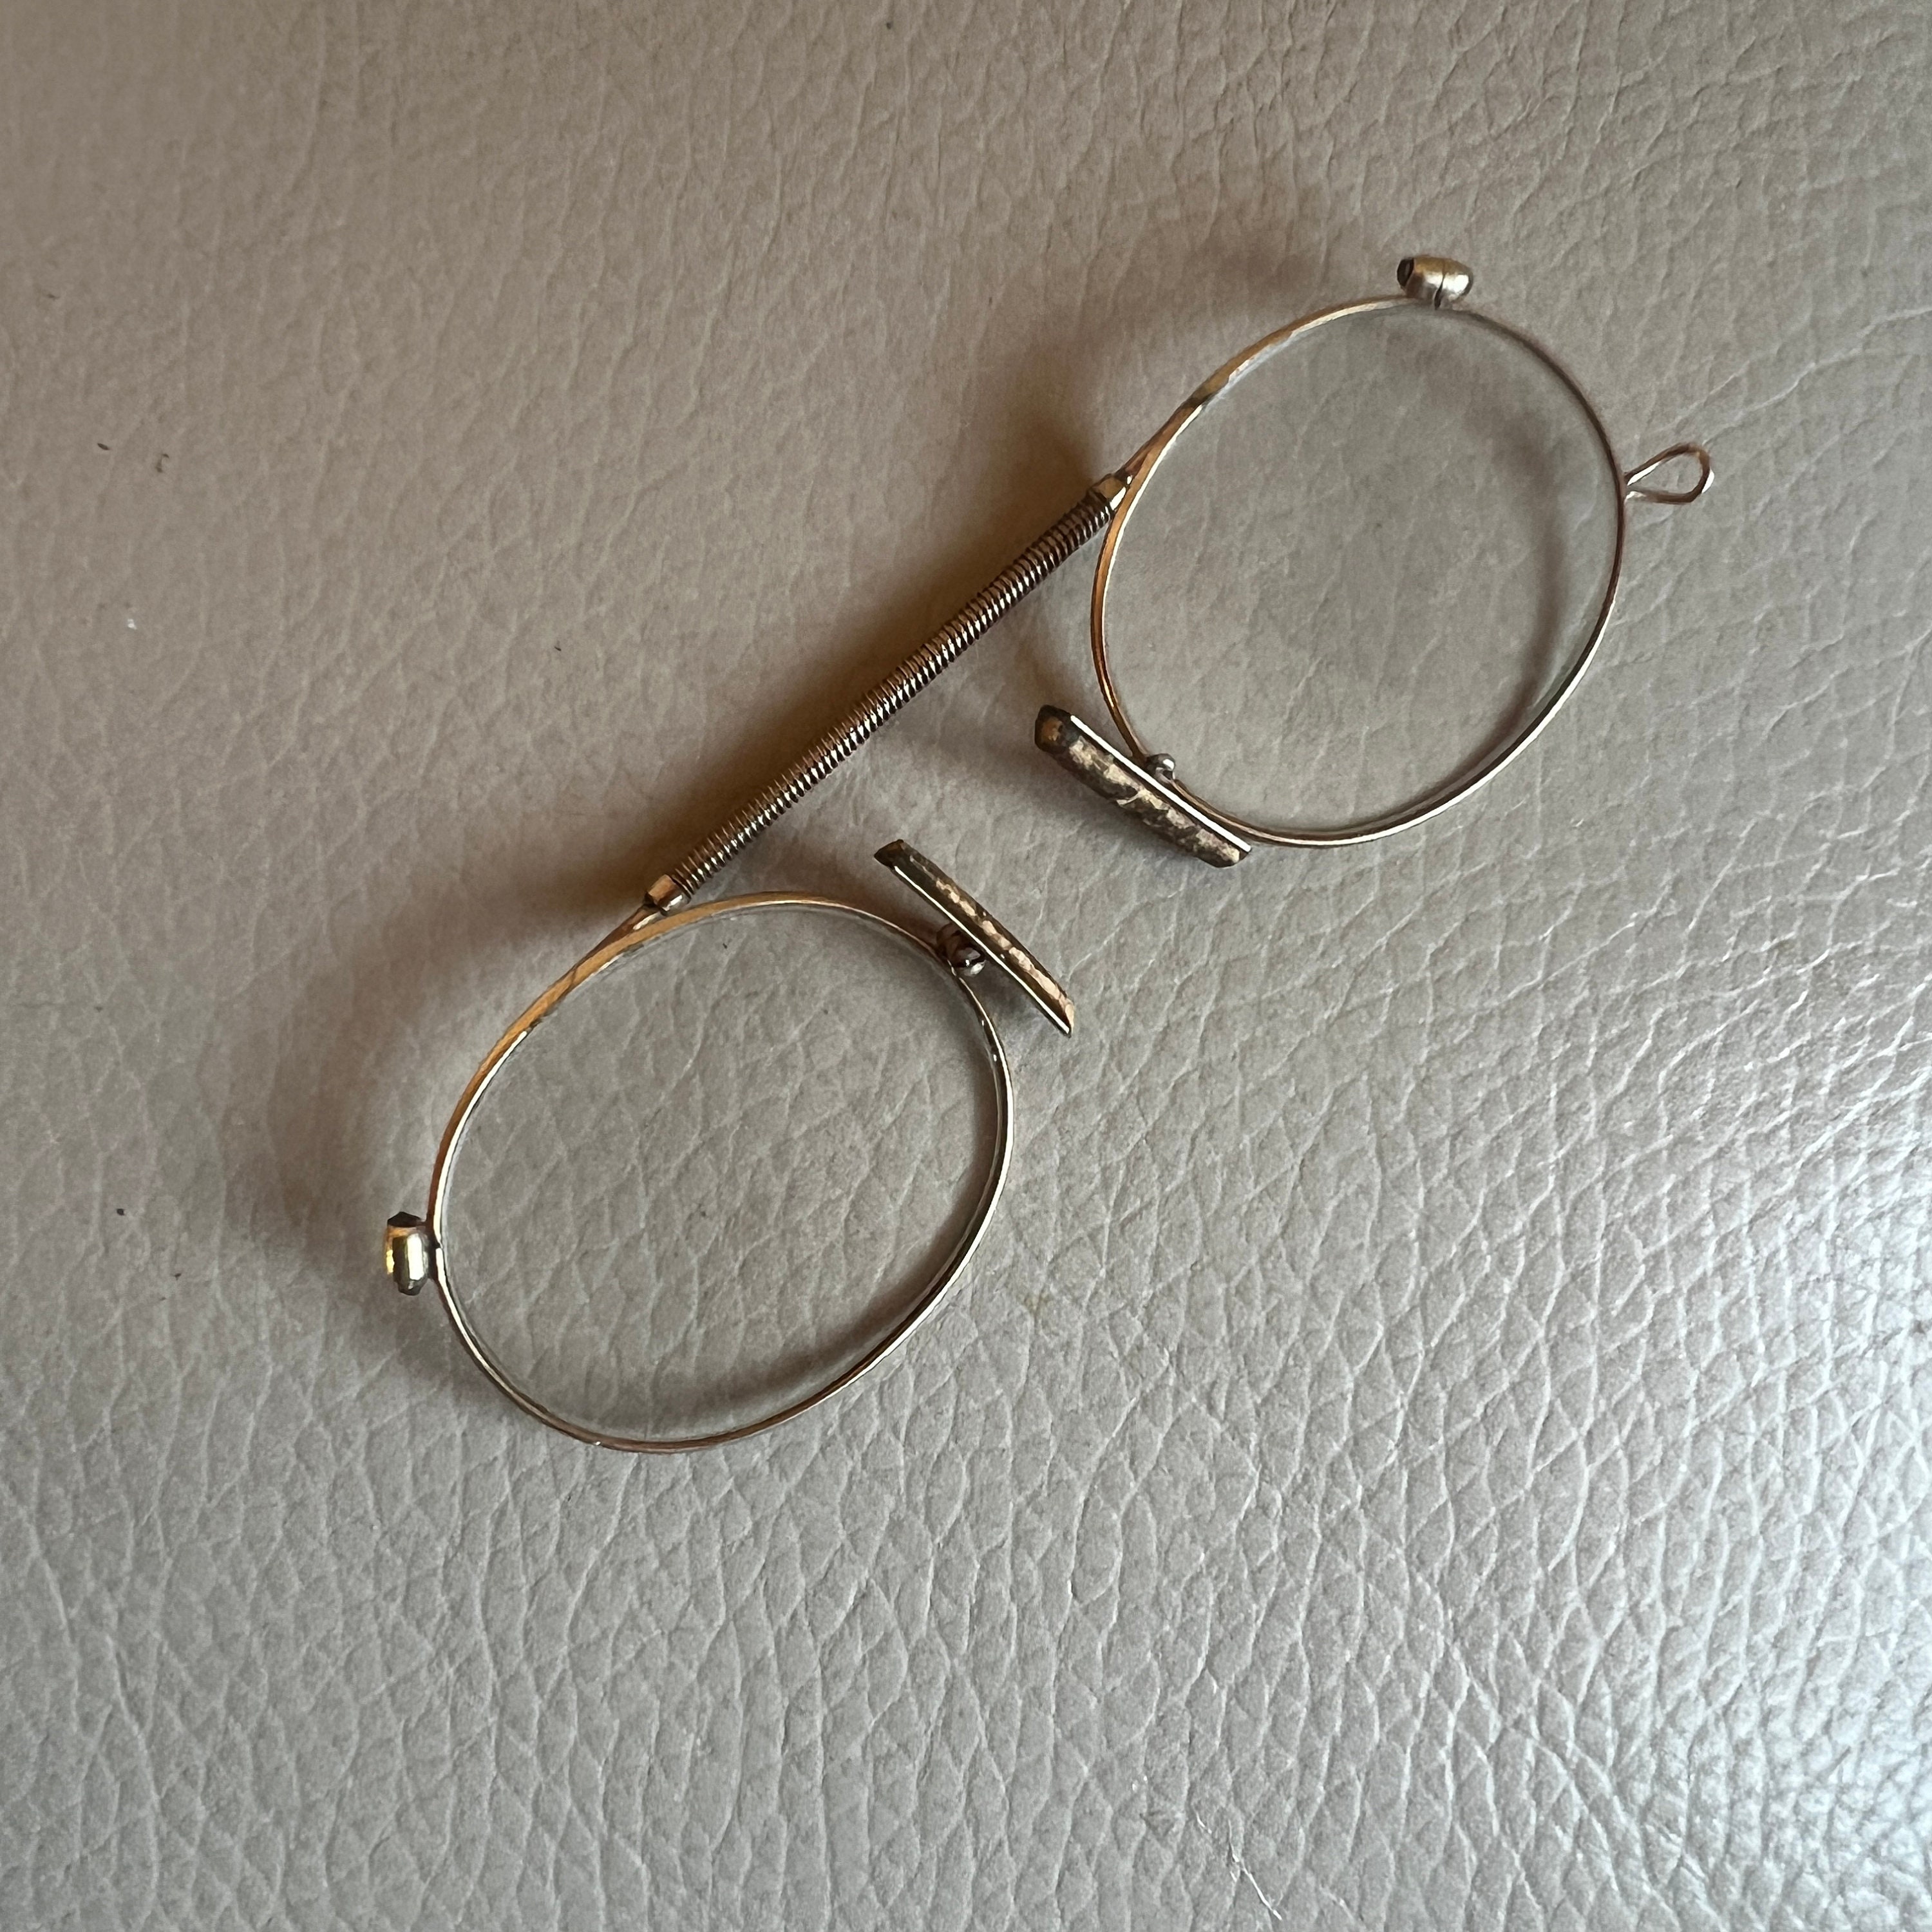 Antique French Gold Wire Tortoiseshell Glasses Pince Nez